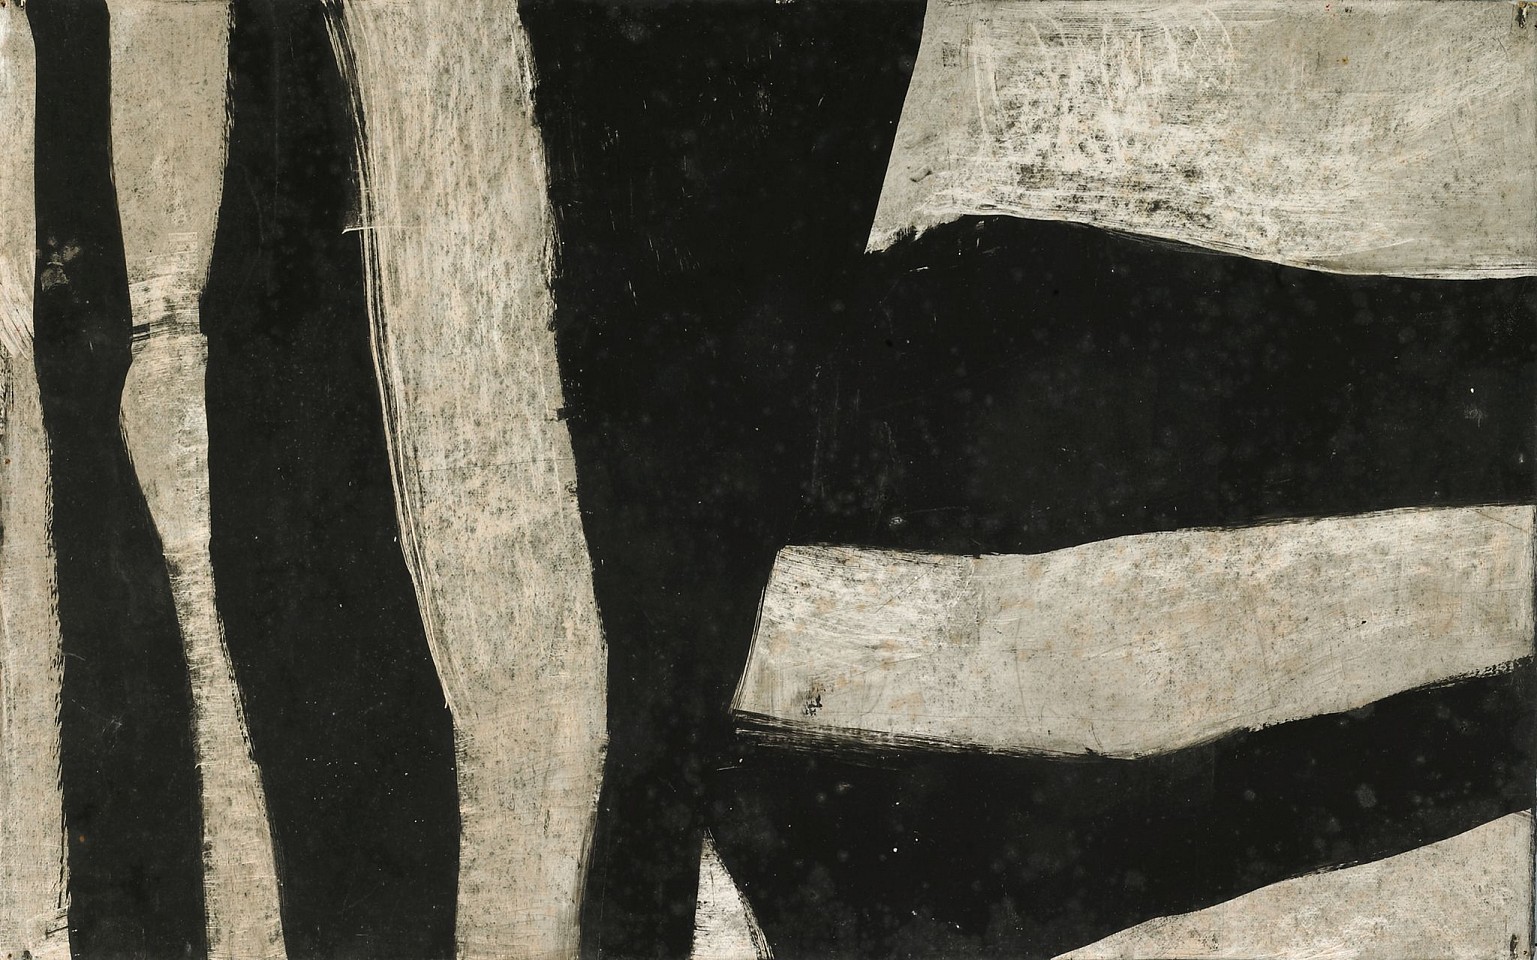 Charlotte Park, Untitled (Black and Gray) | SOLD, c. 1950
Gouache on paper, 8 3/4 x 14 in. (22.2 x 35.6 cm)
PAR-00007